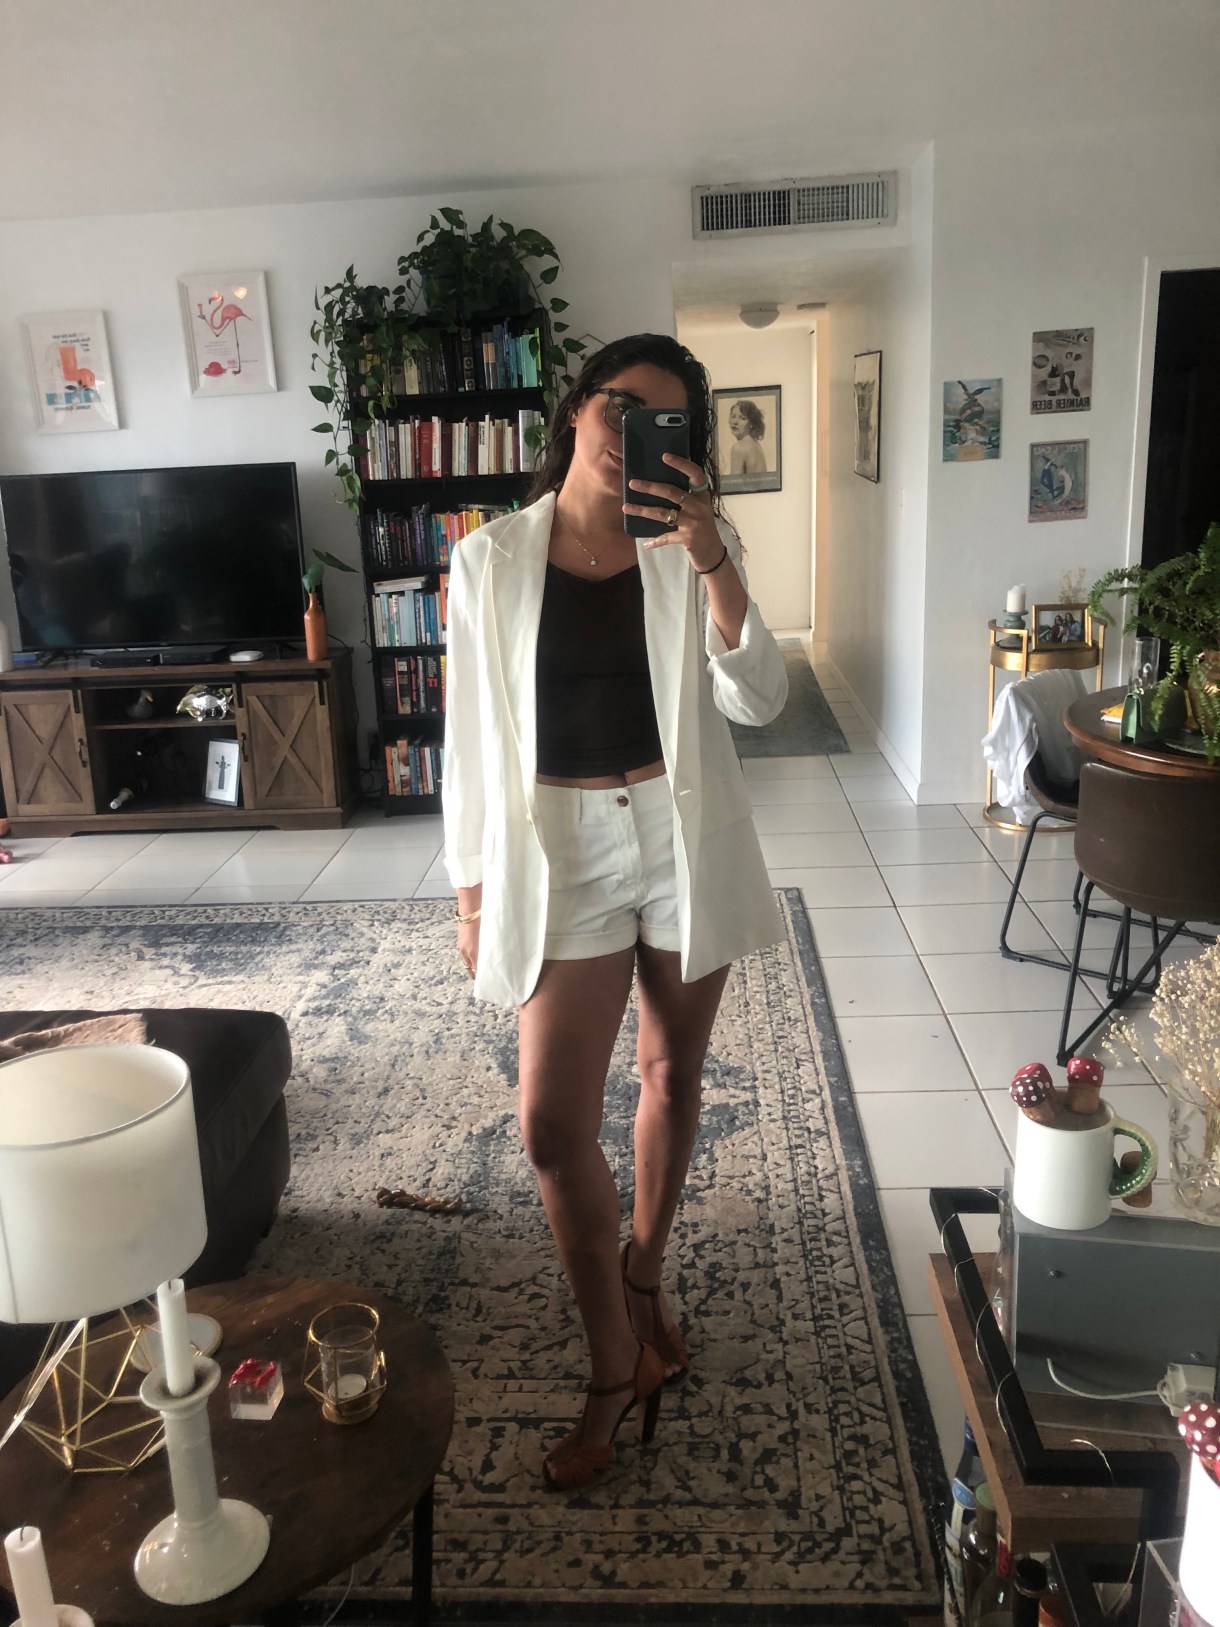 Kayla Kumari Upadhyaya wears a long white blazer over a brown cami and white shorts. She is also wearing high brown heels and taking a mirror selfie in her living room.